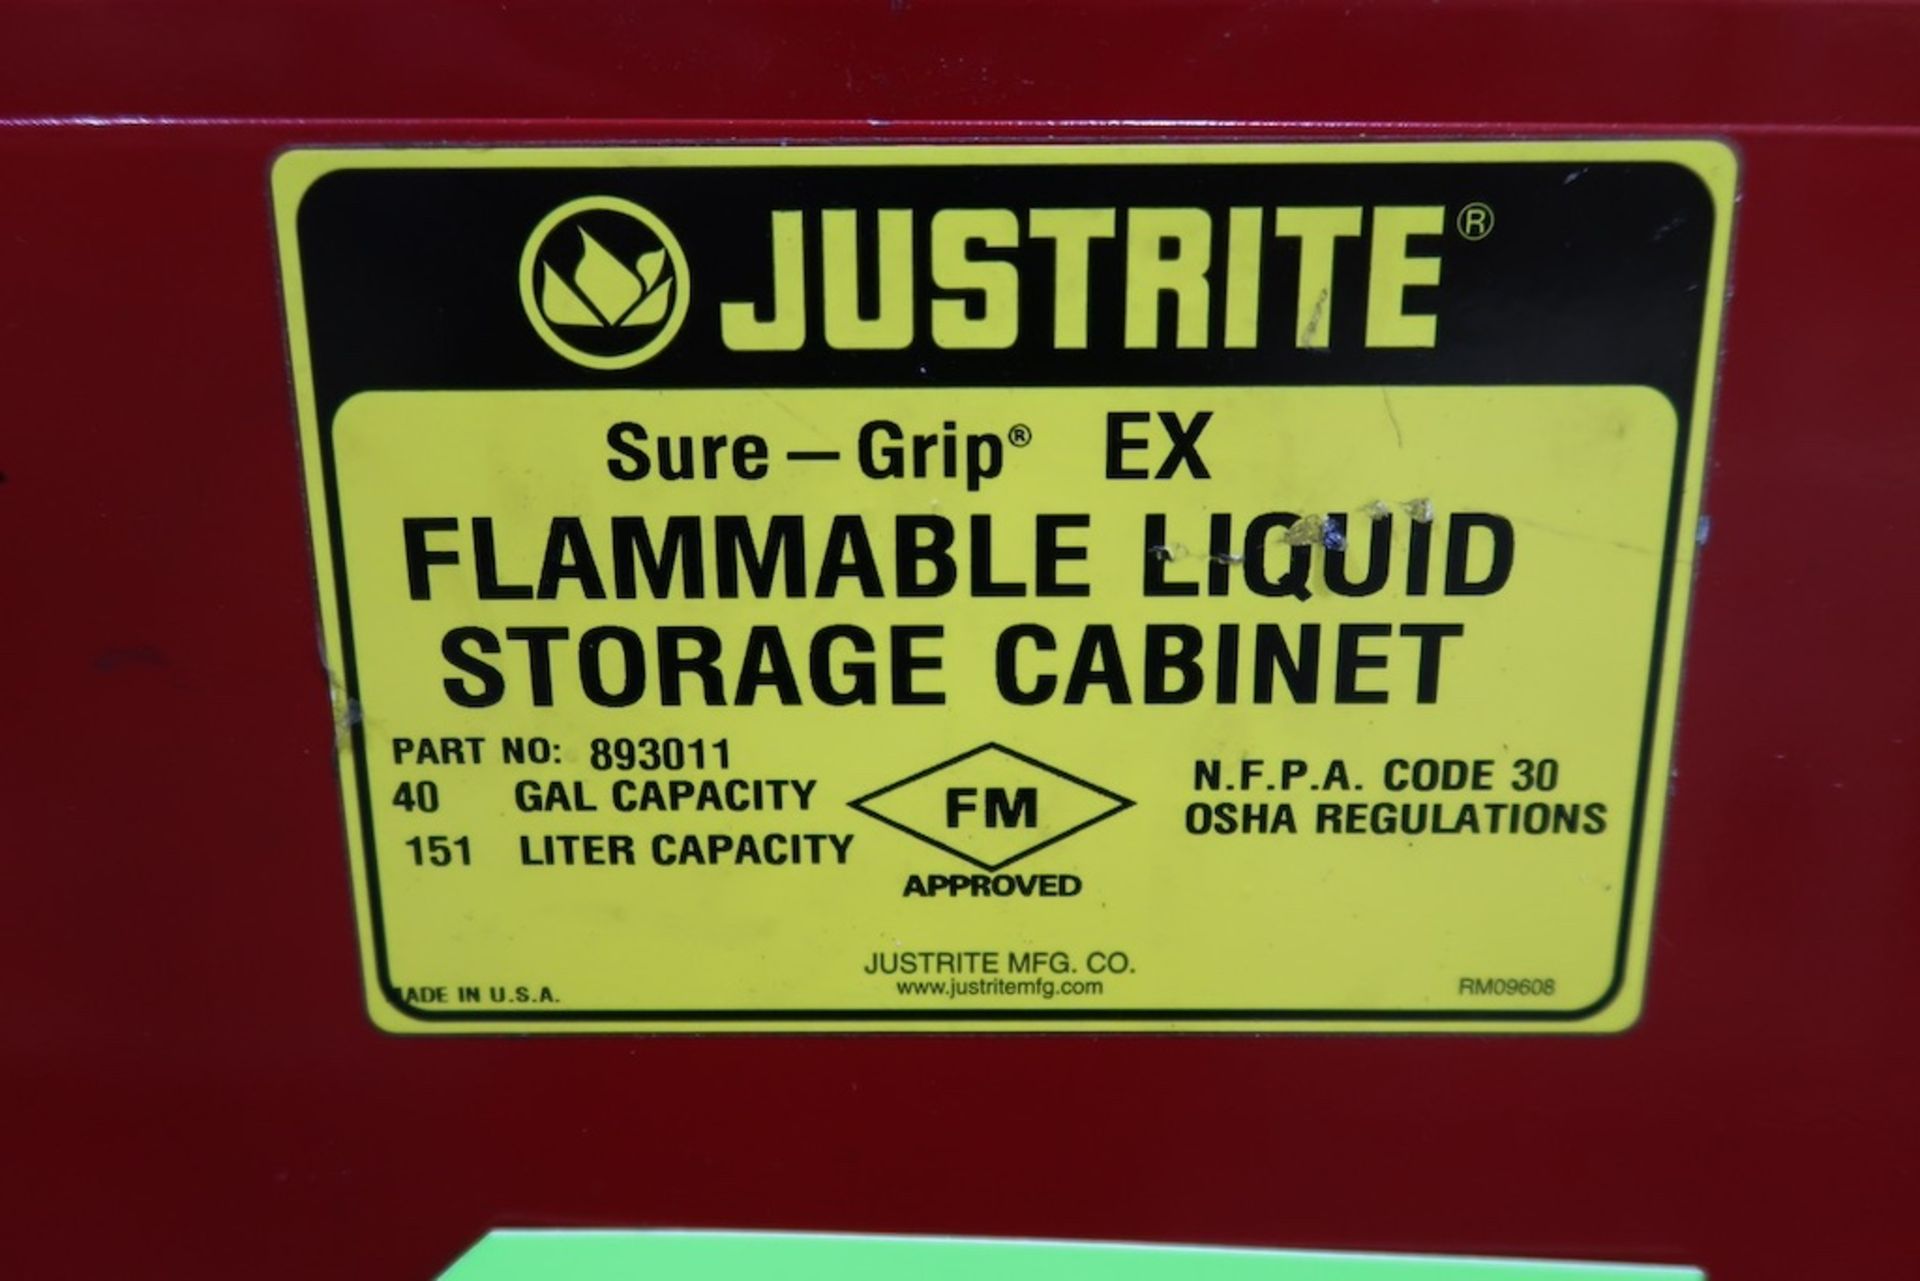 Justrite 40-Gal Flame Cabinet - Image 3 of 3